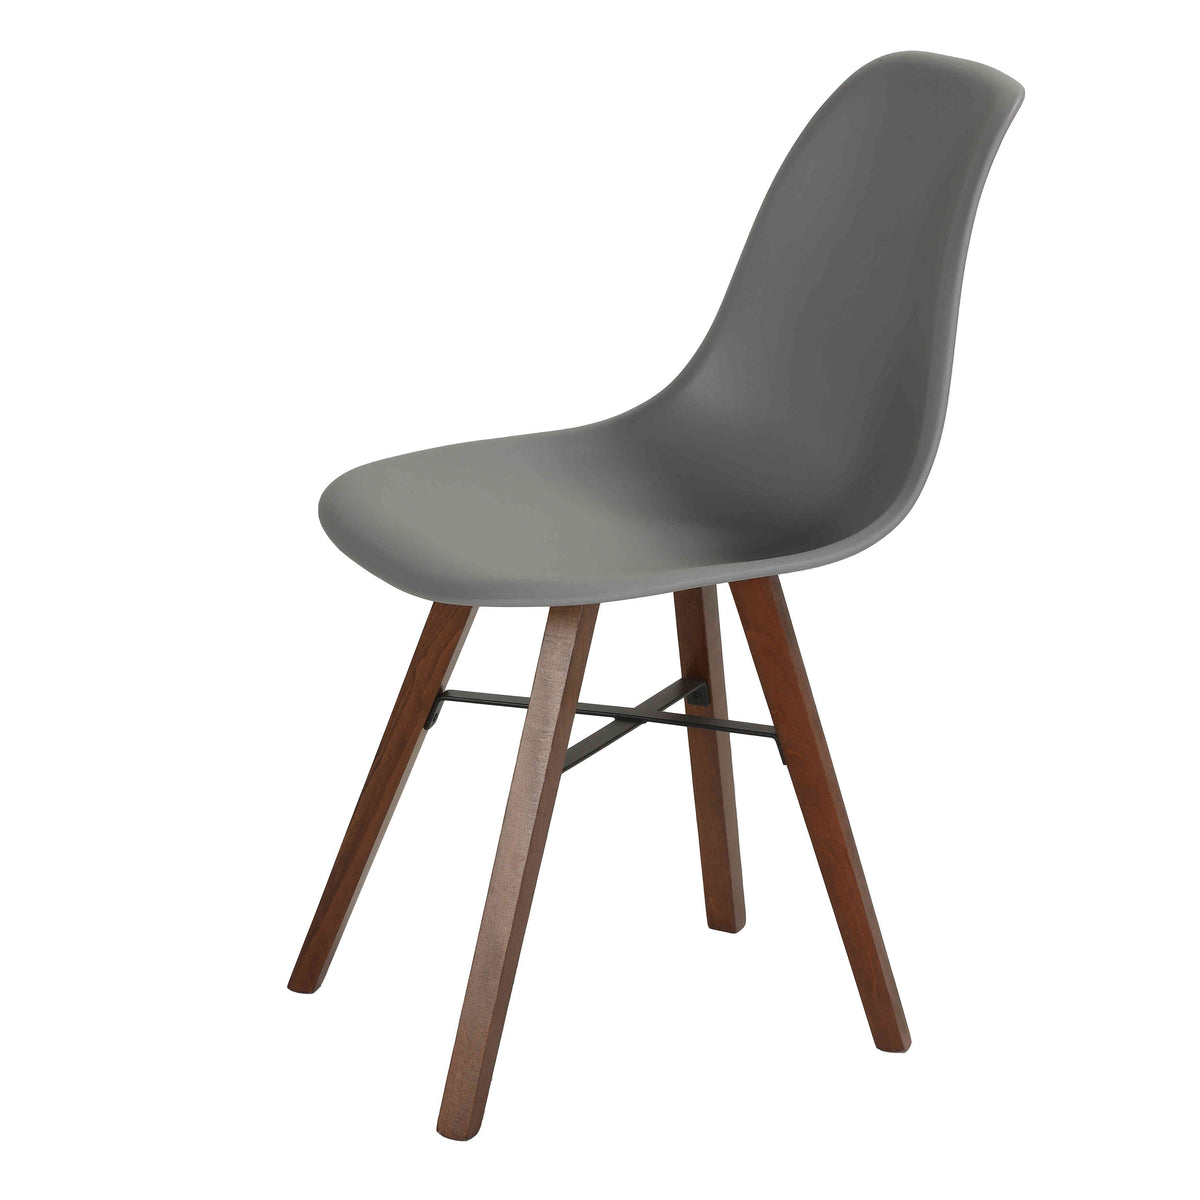 Cortesi Home Xena Dining Chair in Grey Plastic with Cushion, Walnut Finish Legs (Set of 4)